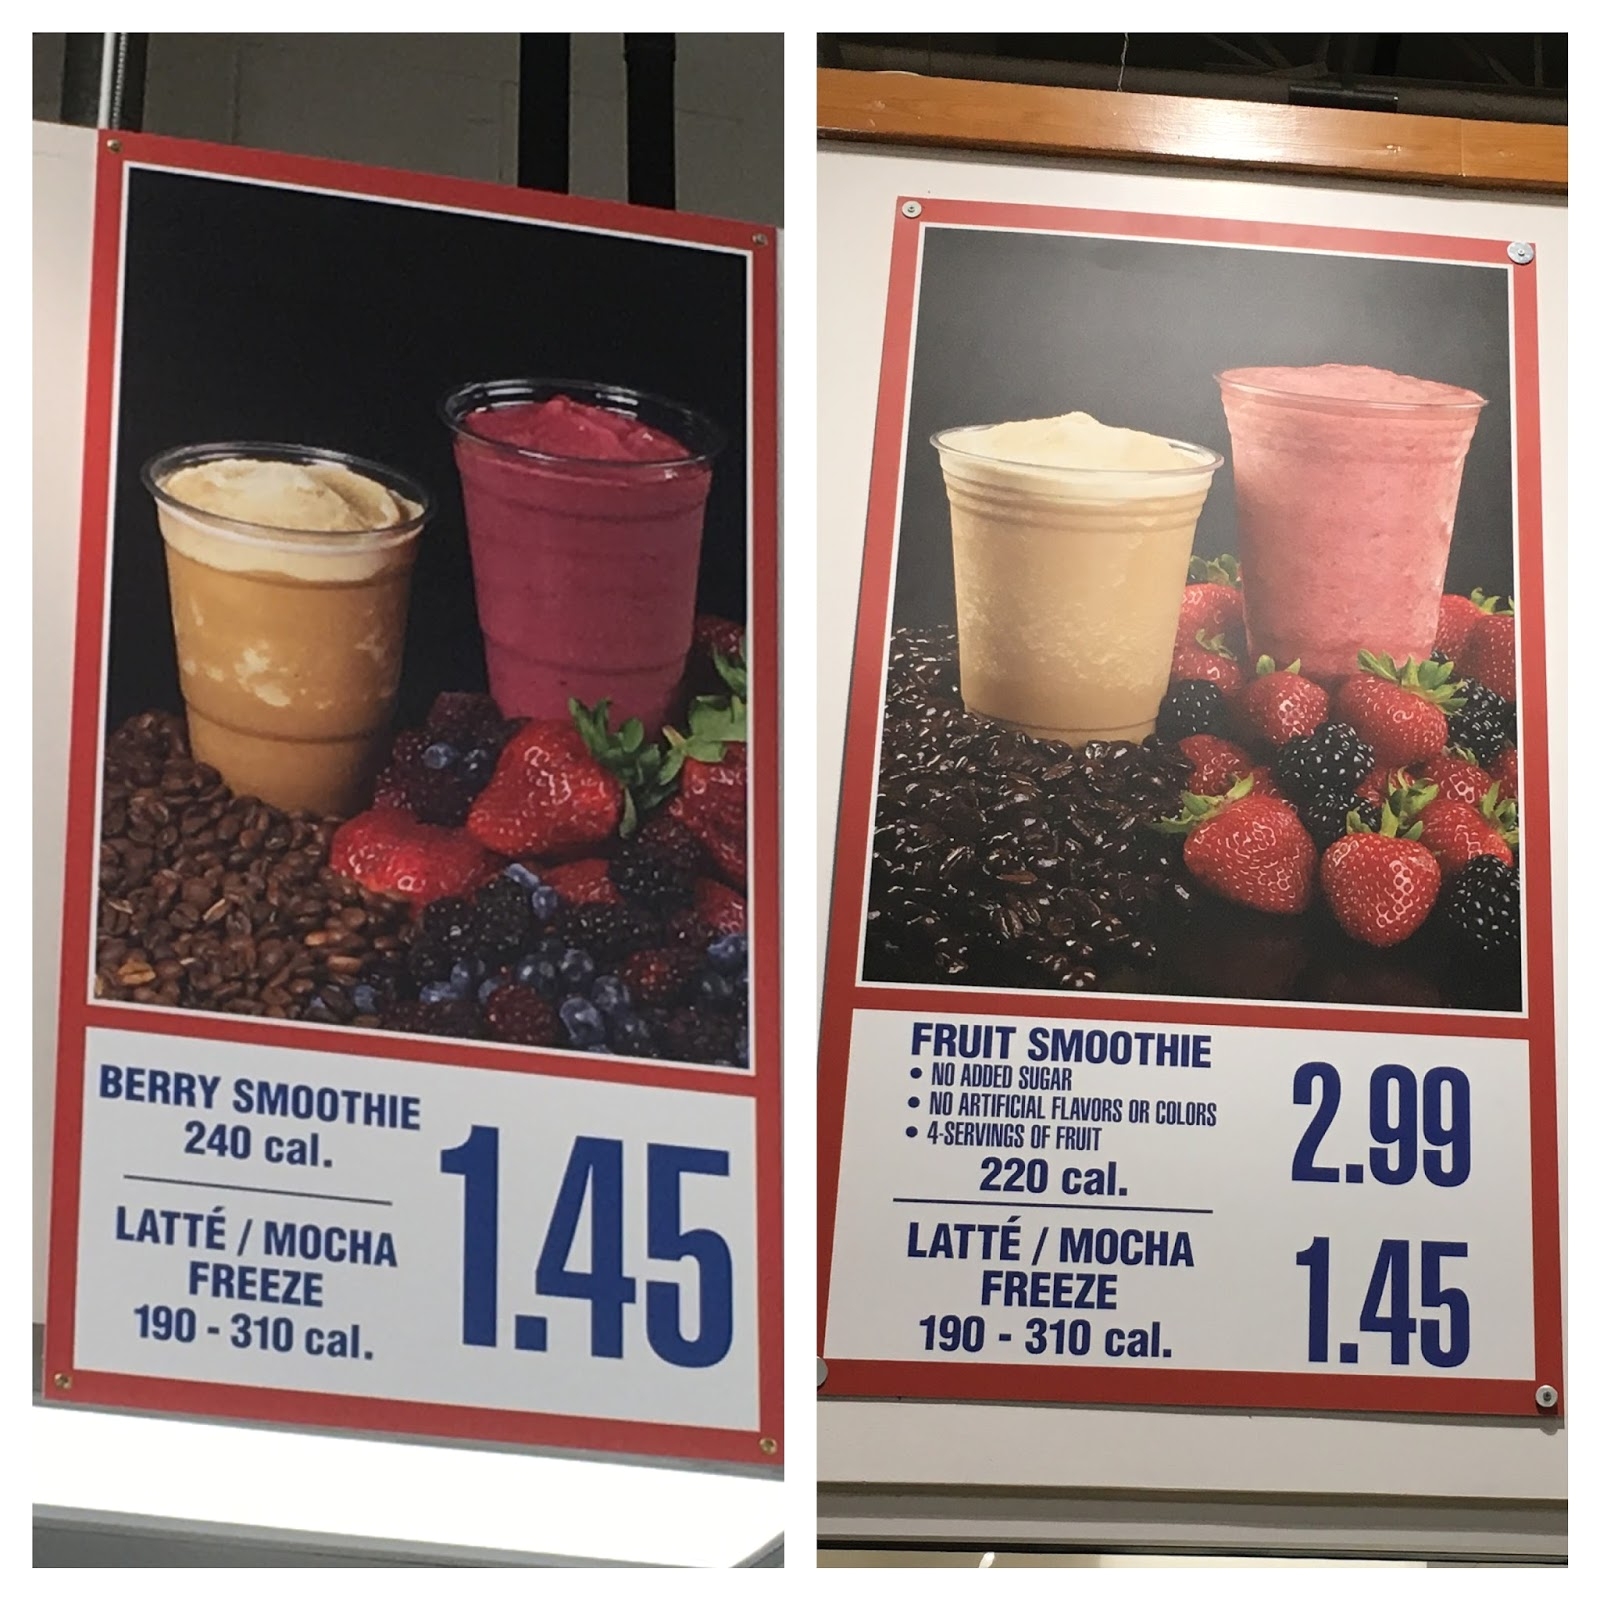 but this so called healthier smoothie comes at a massive 106 price increase the beloved berry smoothie cost a mere 1 45 while the new fruit smoothie